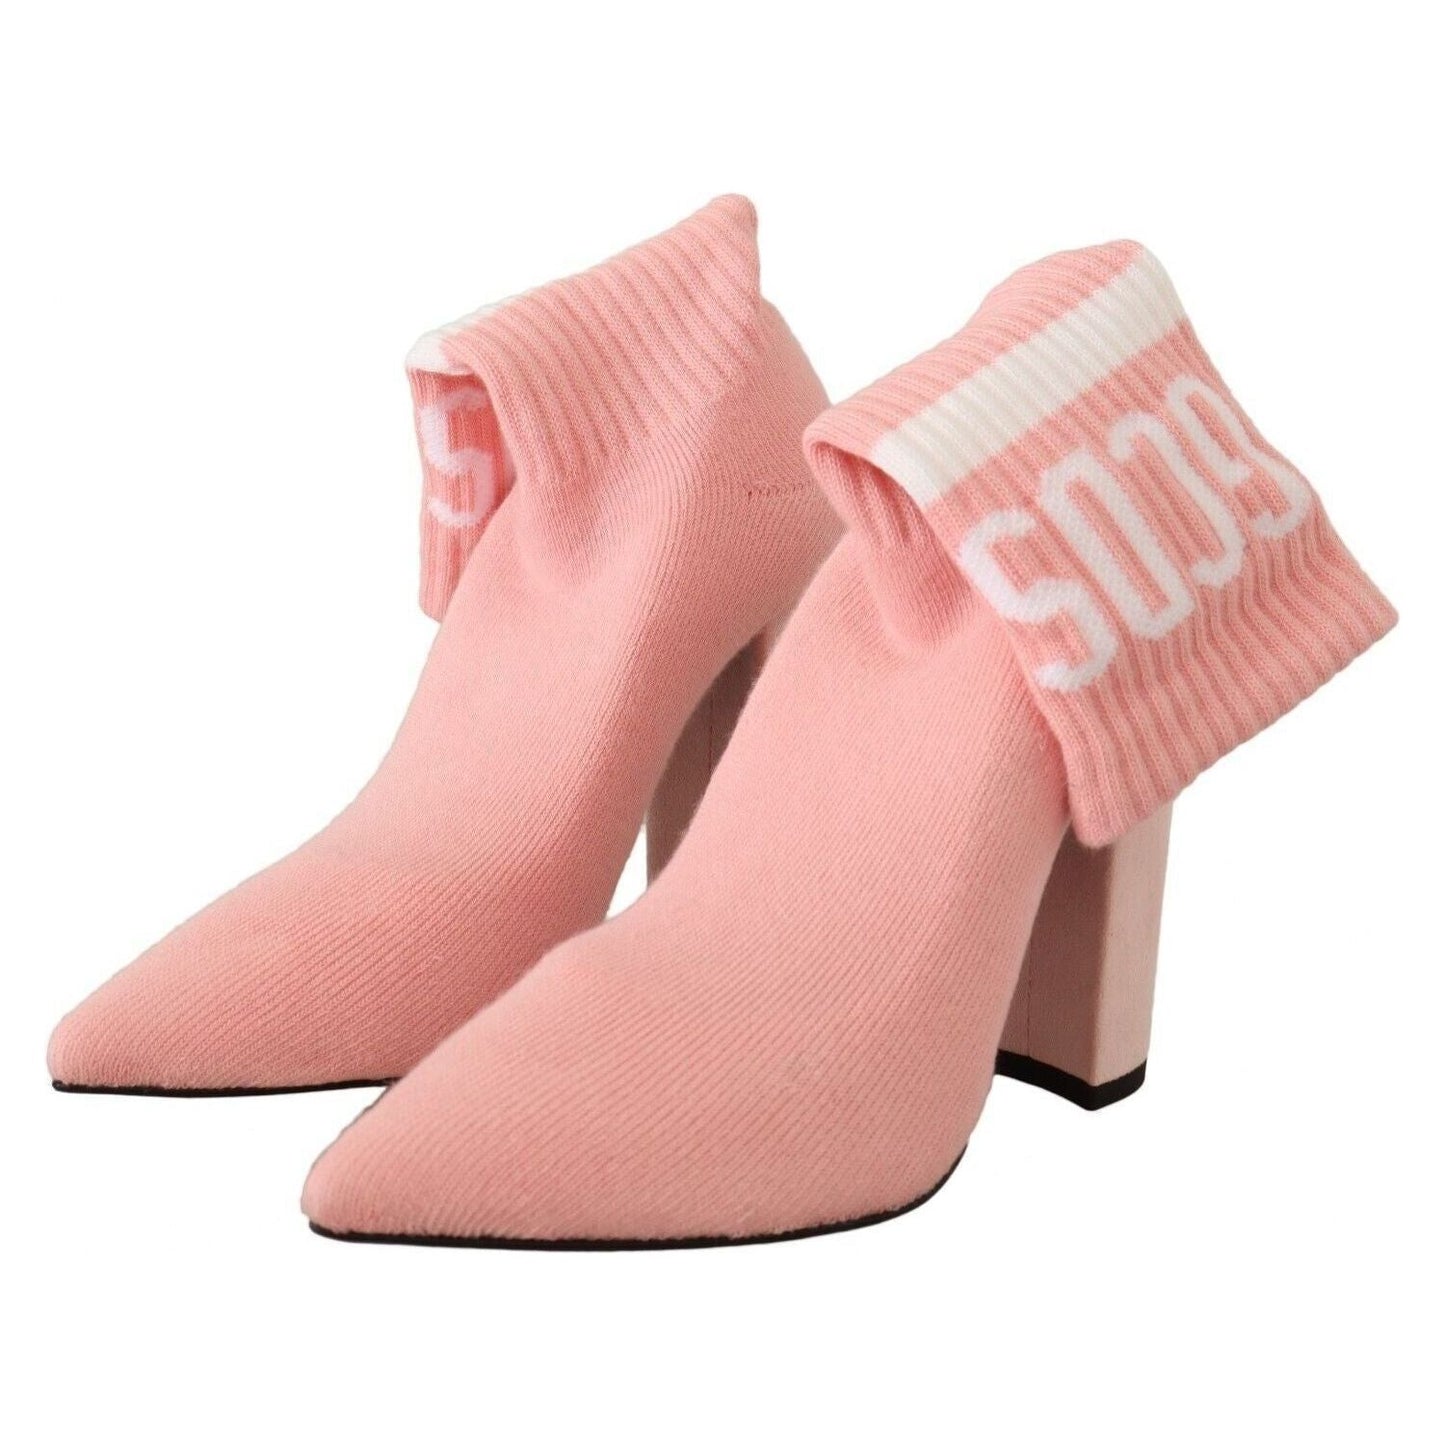 GCDS Chic Pink Suede Ankle Boots with Logo Socks pink-suede-logo-socks-block-heel-ankle-boots-shoes